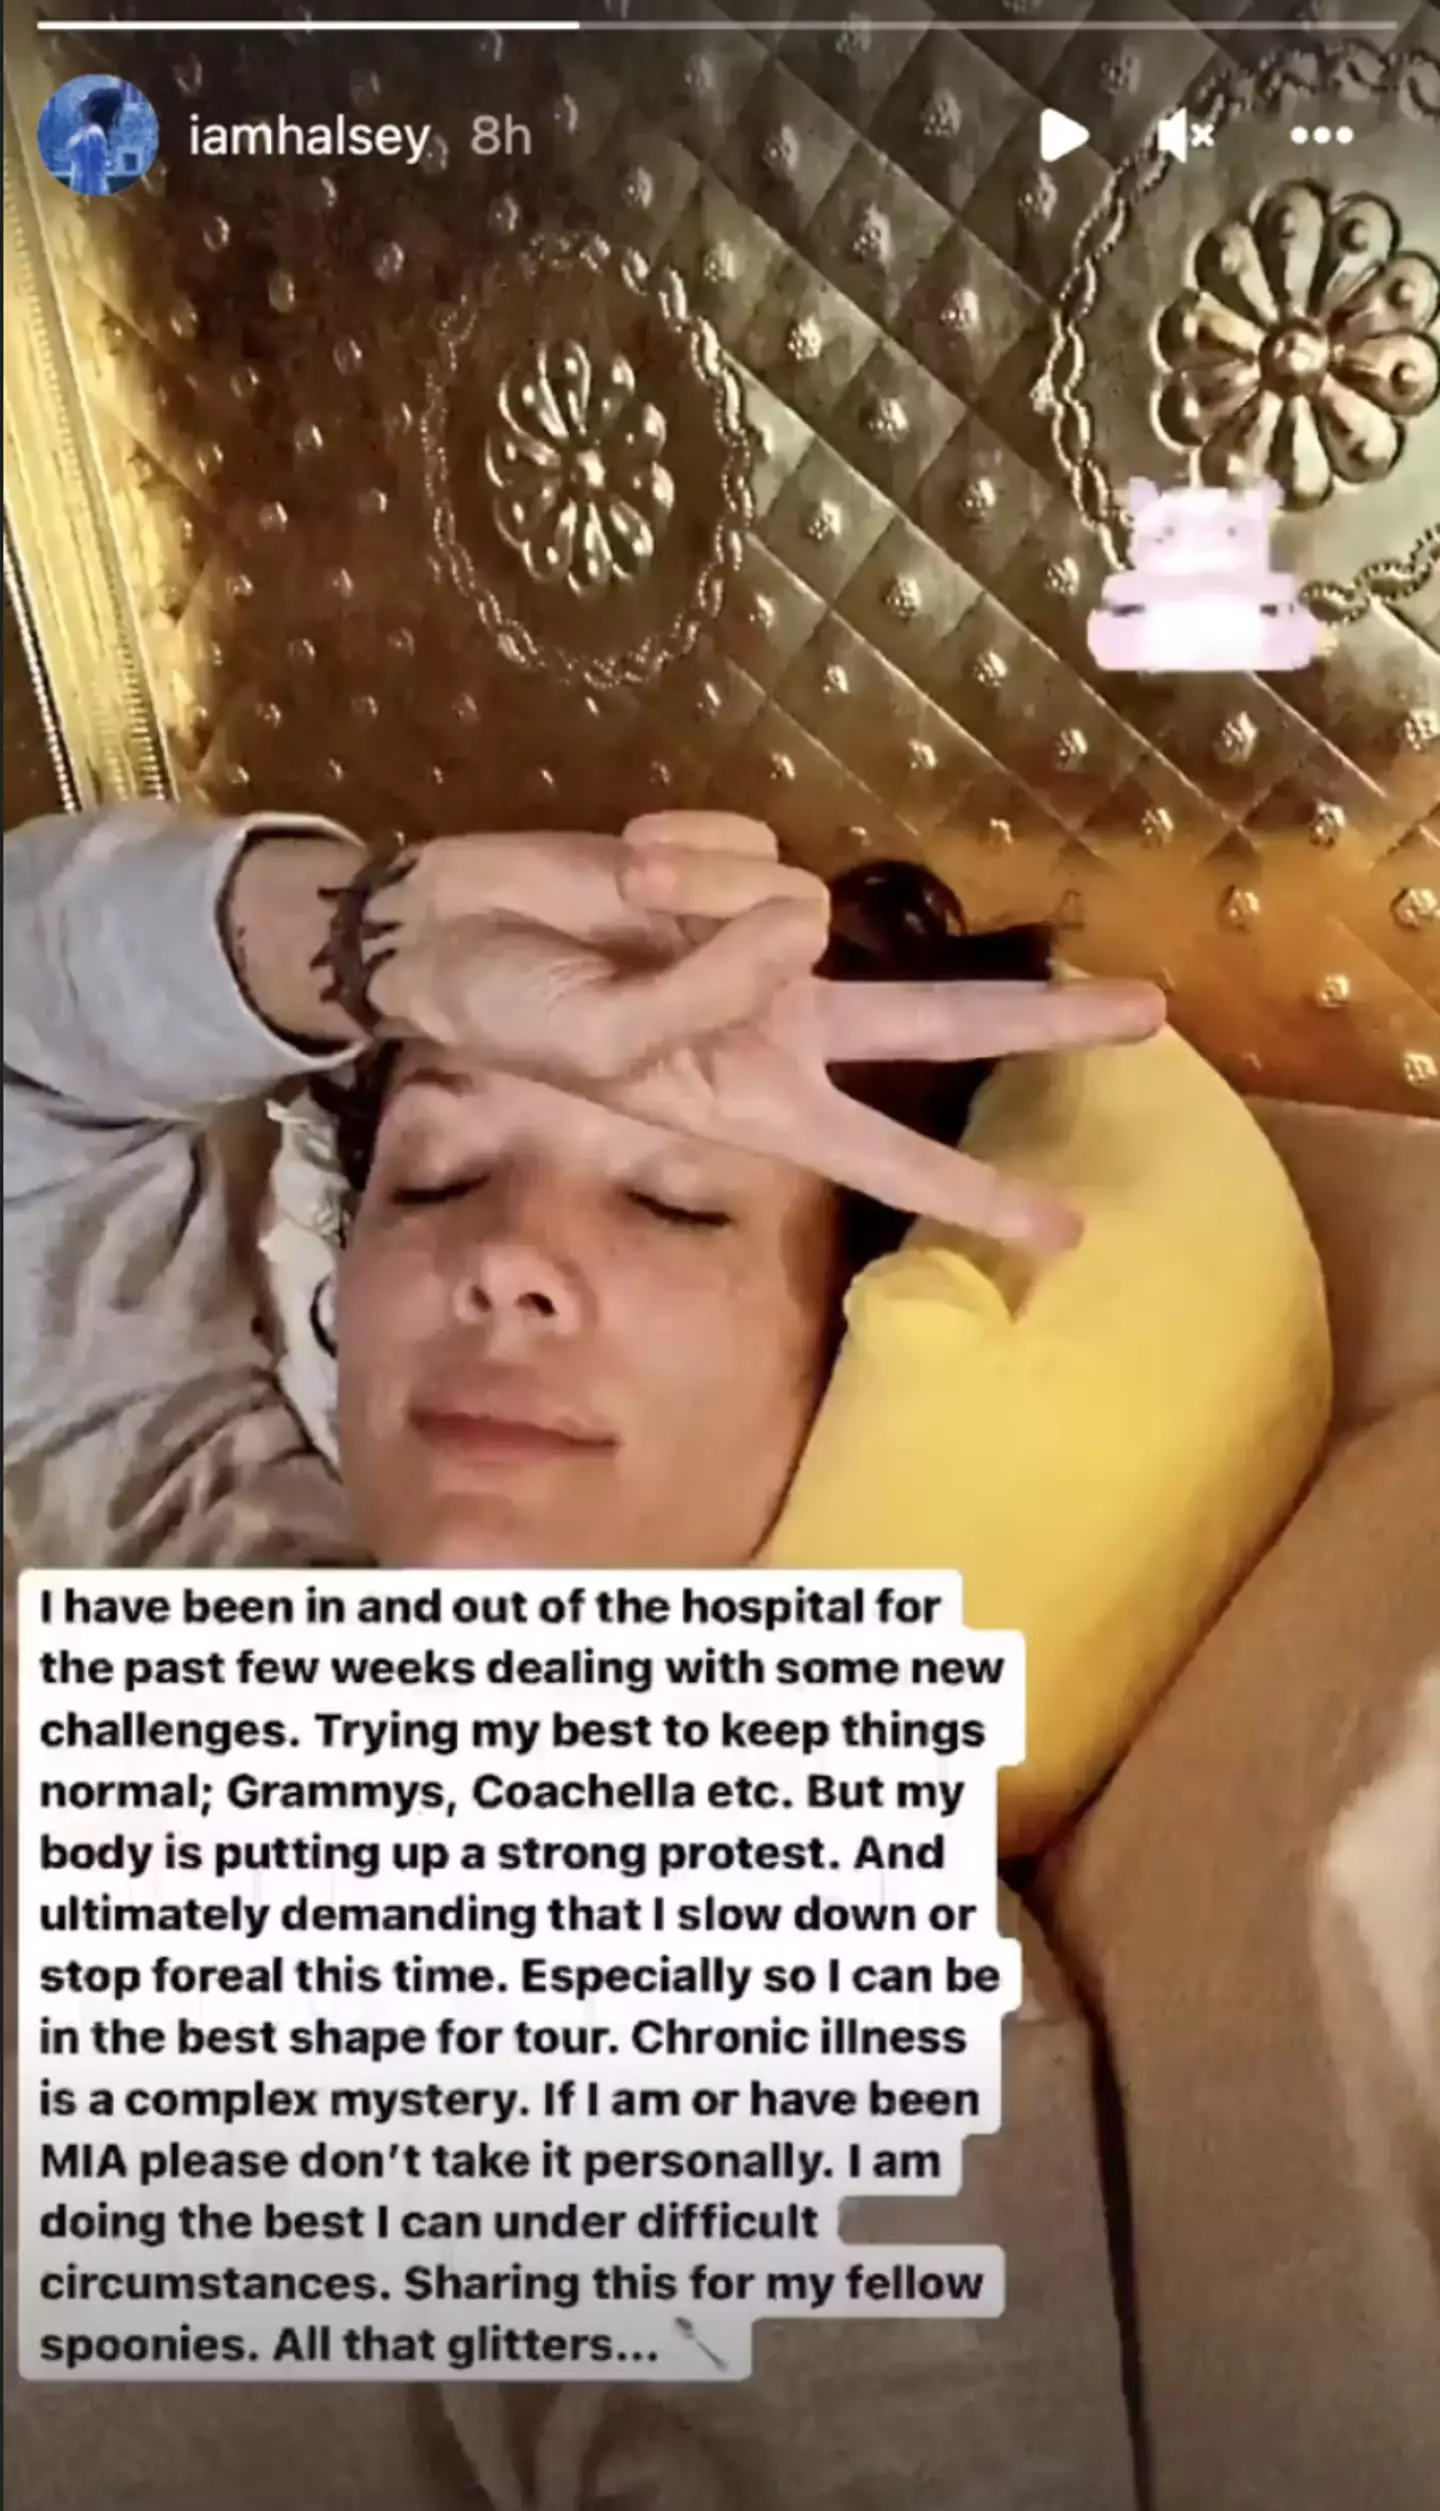 Halsey revealed how they have been 'in and out of hospital for the past few weeks'.